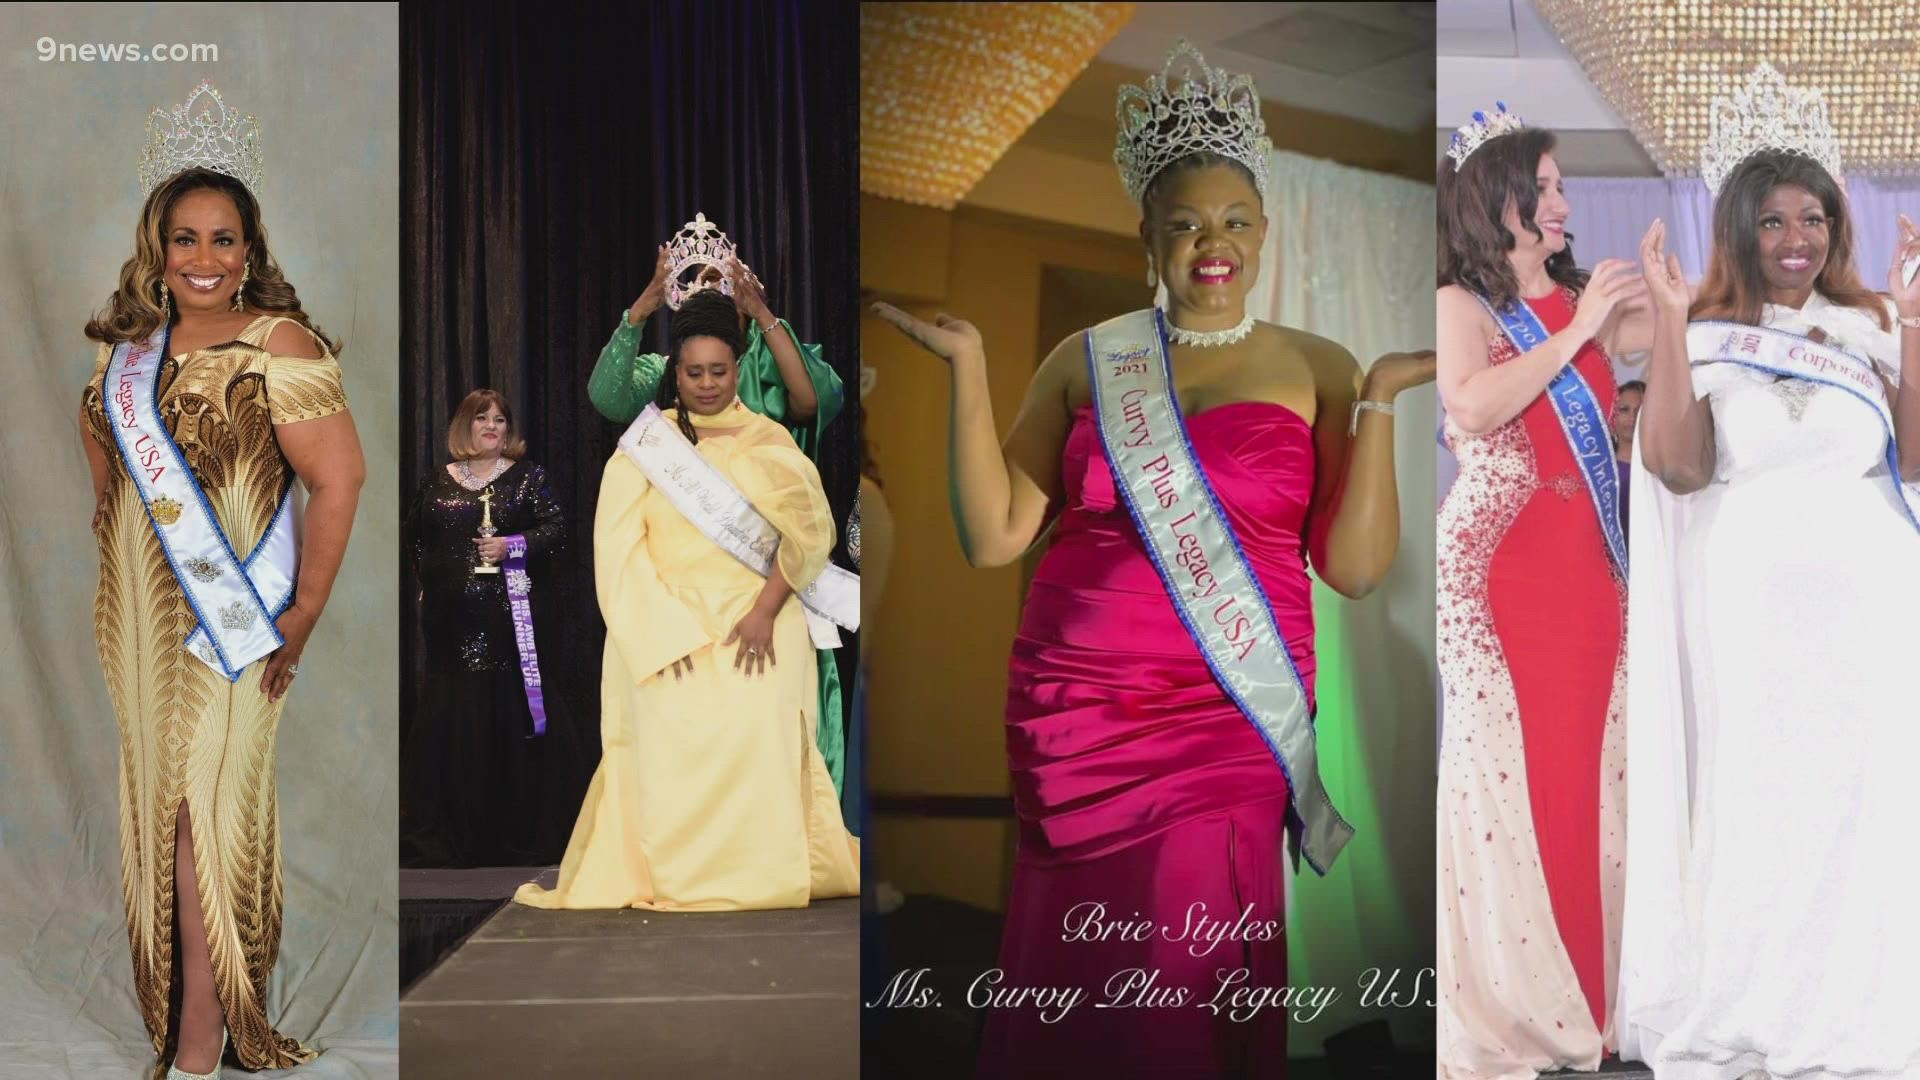 These four Colorado women are all national pageant winner and they're using their platforms to advance important causes.